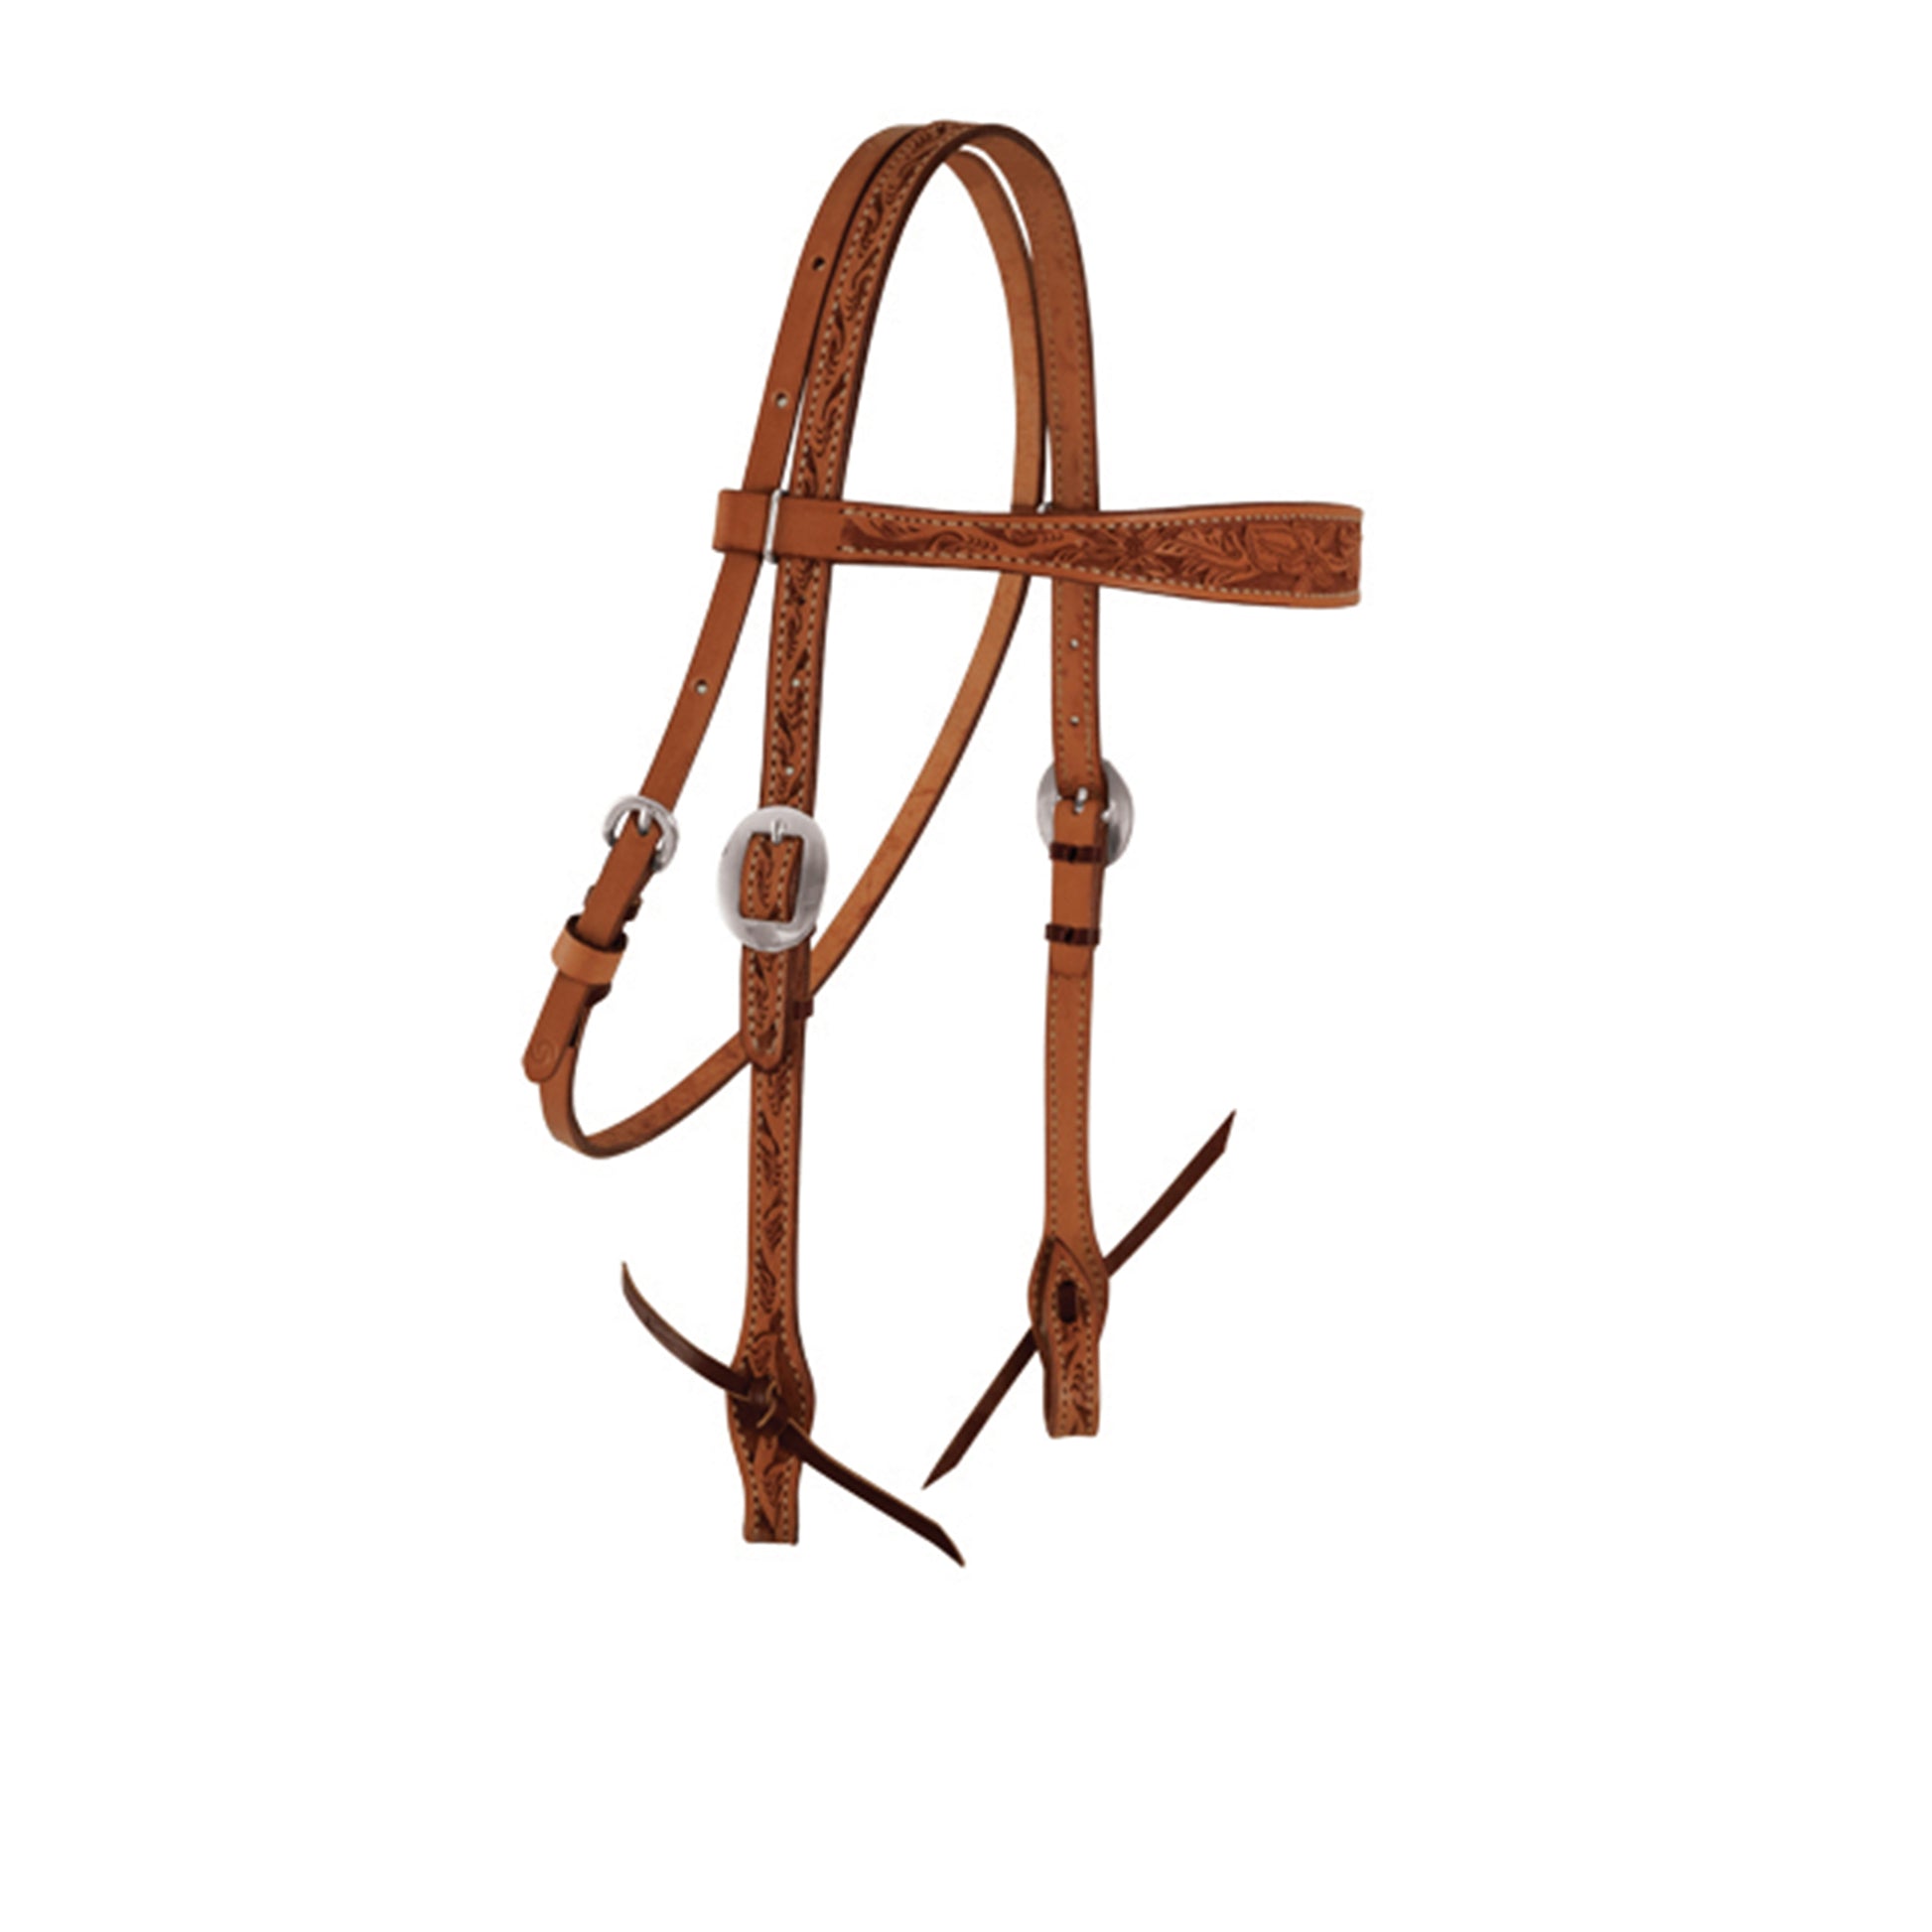 Elite 1-1/2" contour browband headstall toast leather floral tooled.